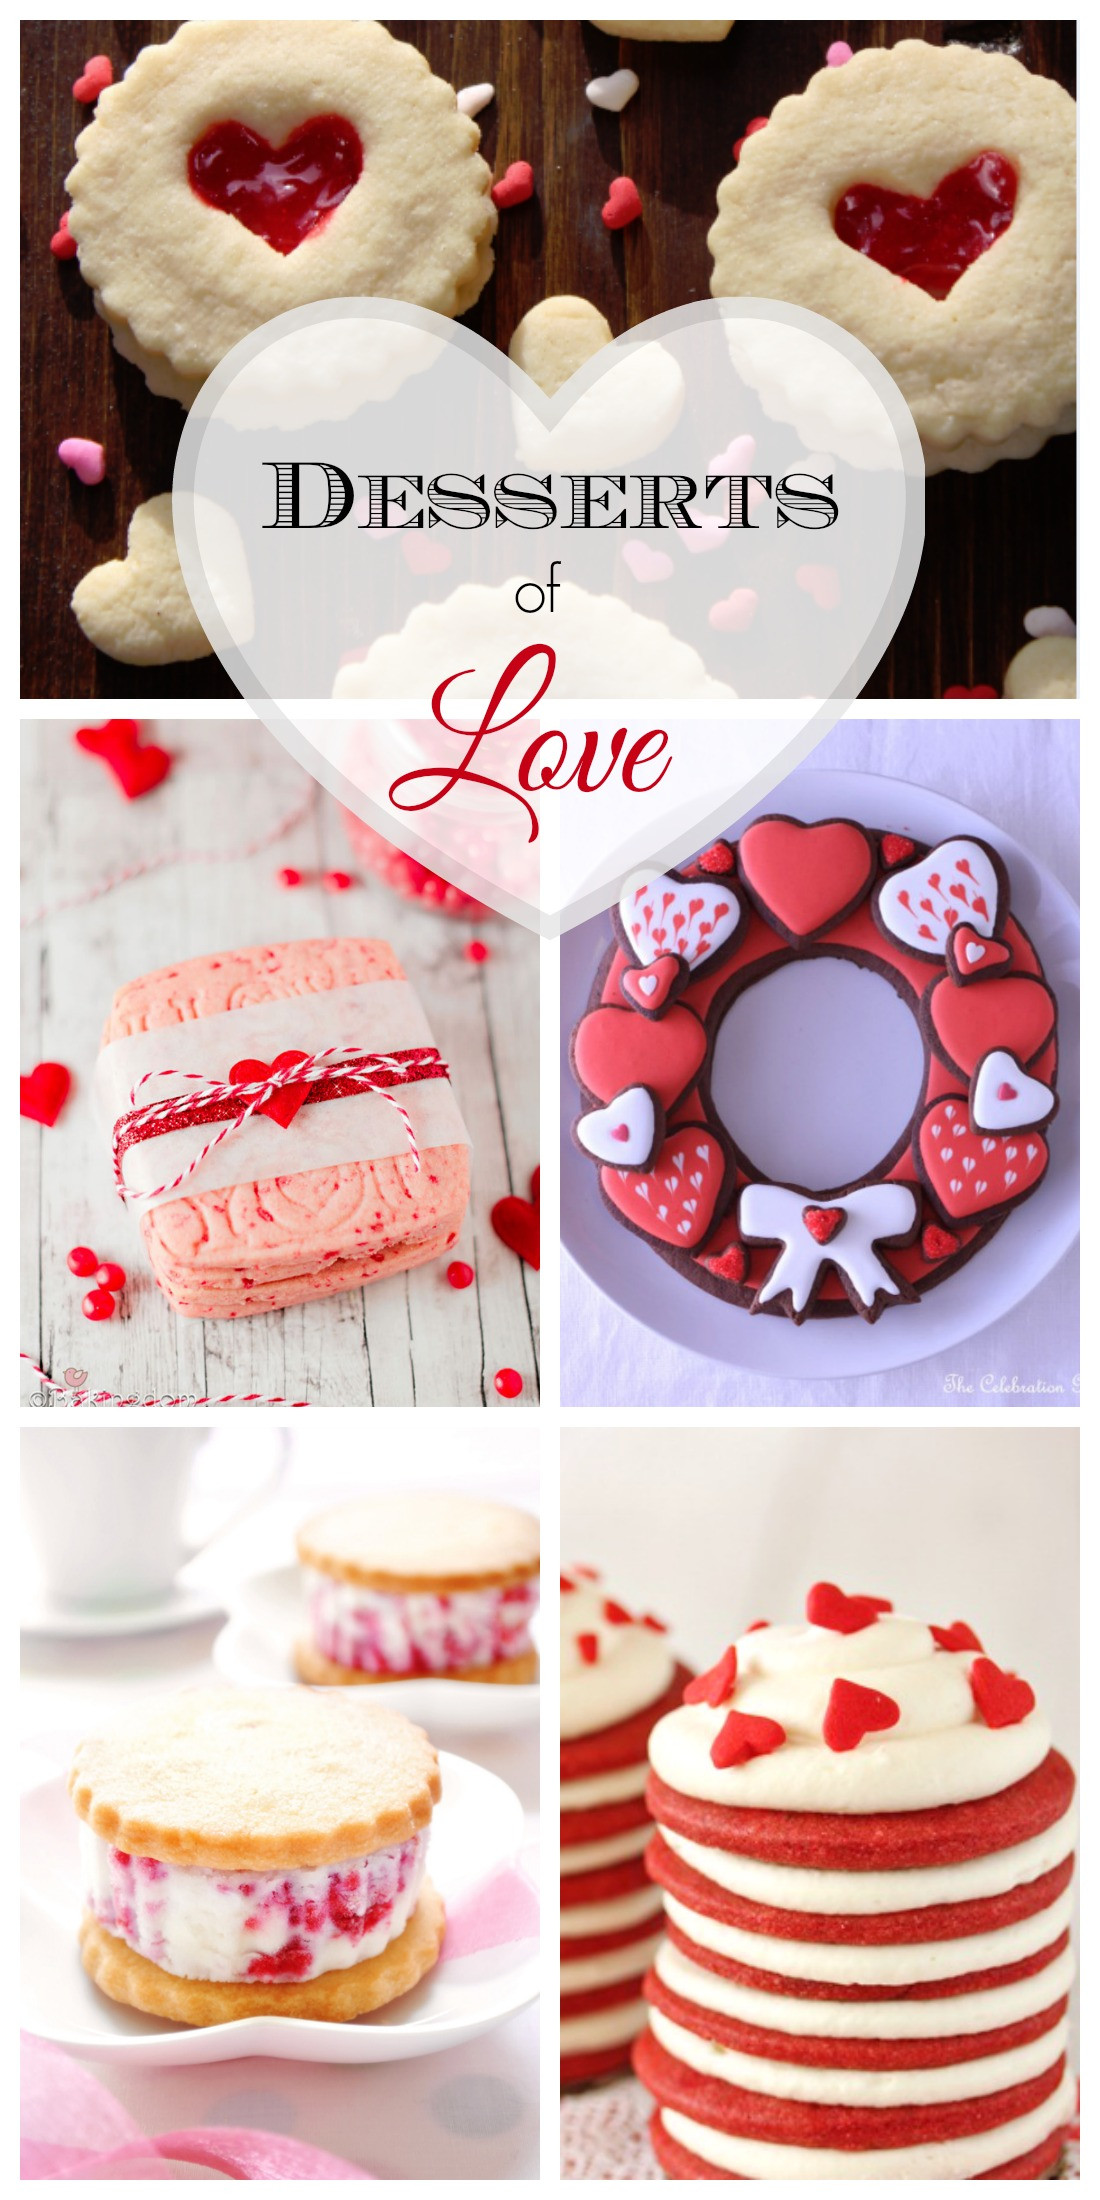 Desserts For Valentines Day
 14 Desserts That Will Make You Fall in Love on Valentine s